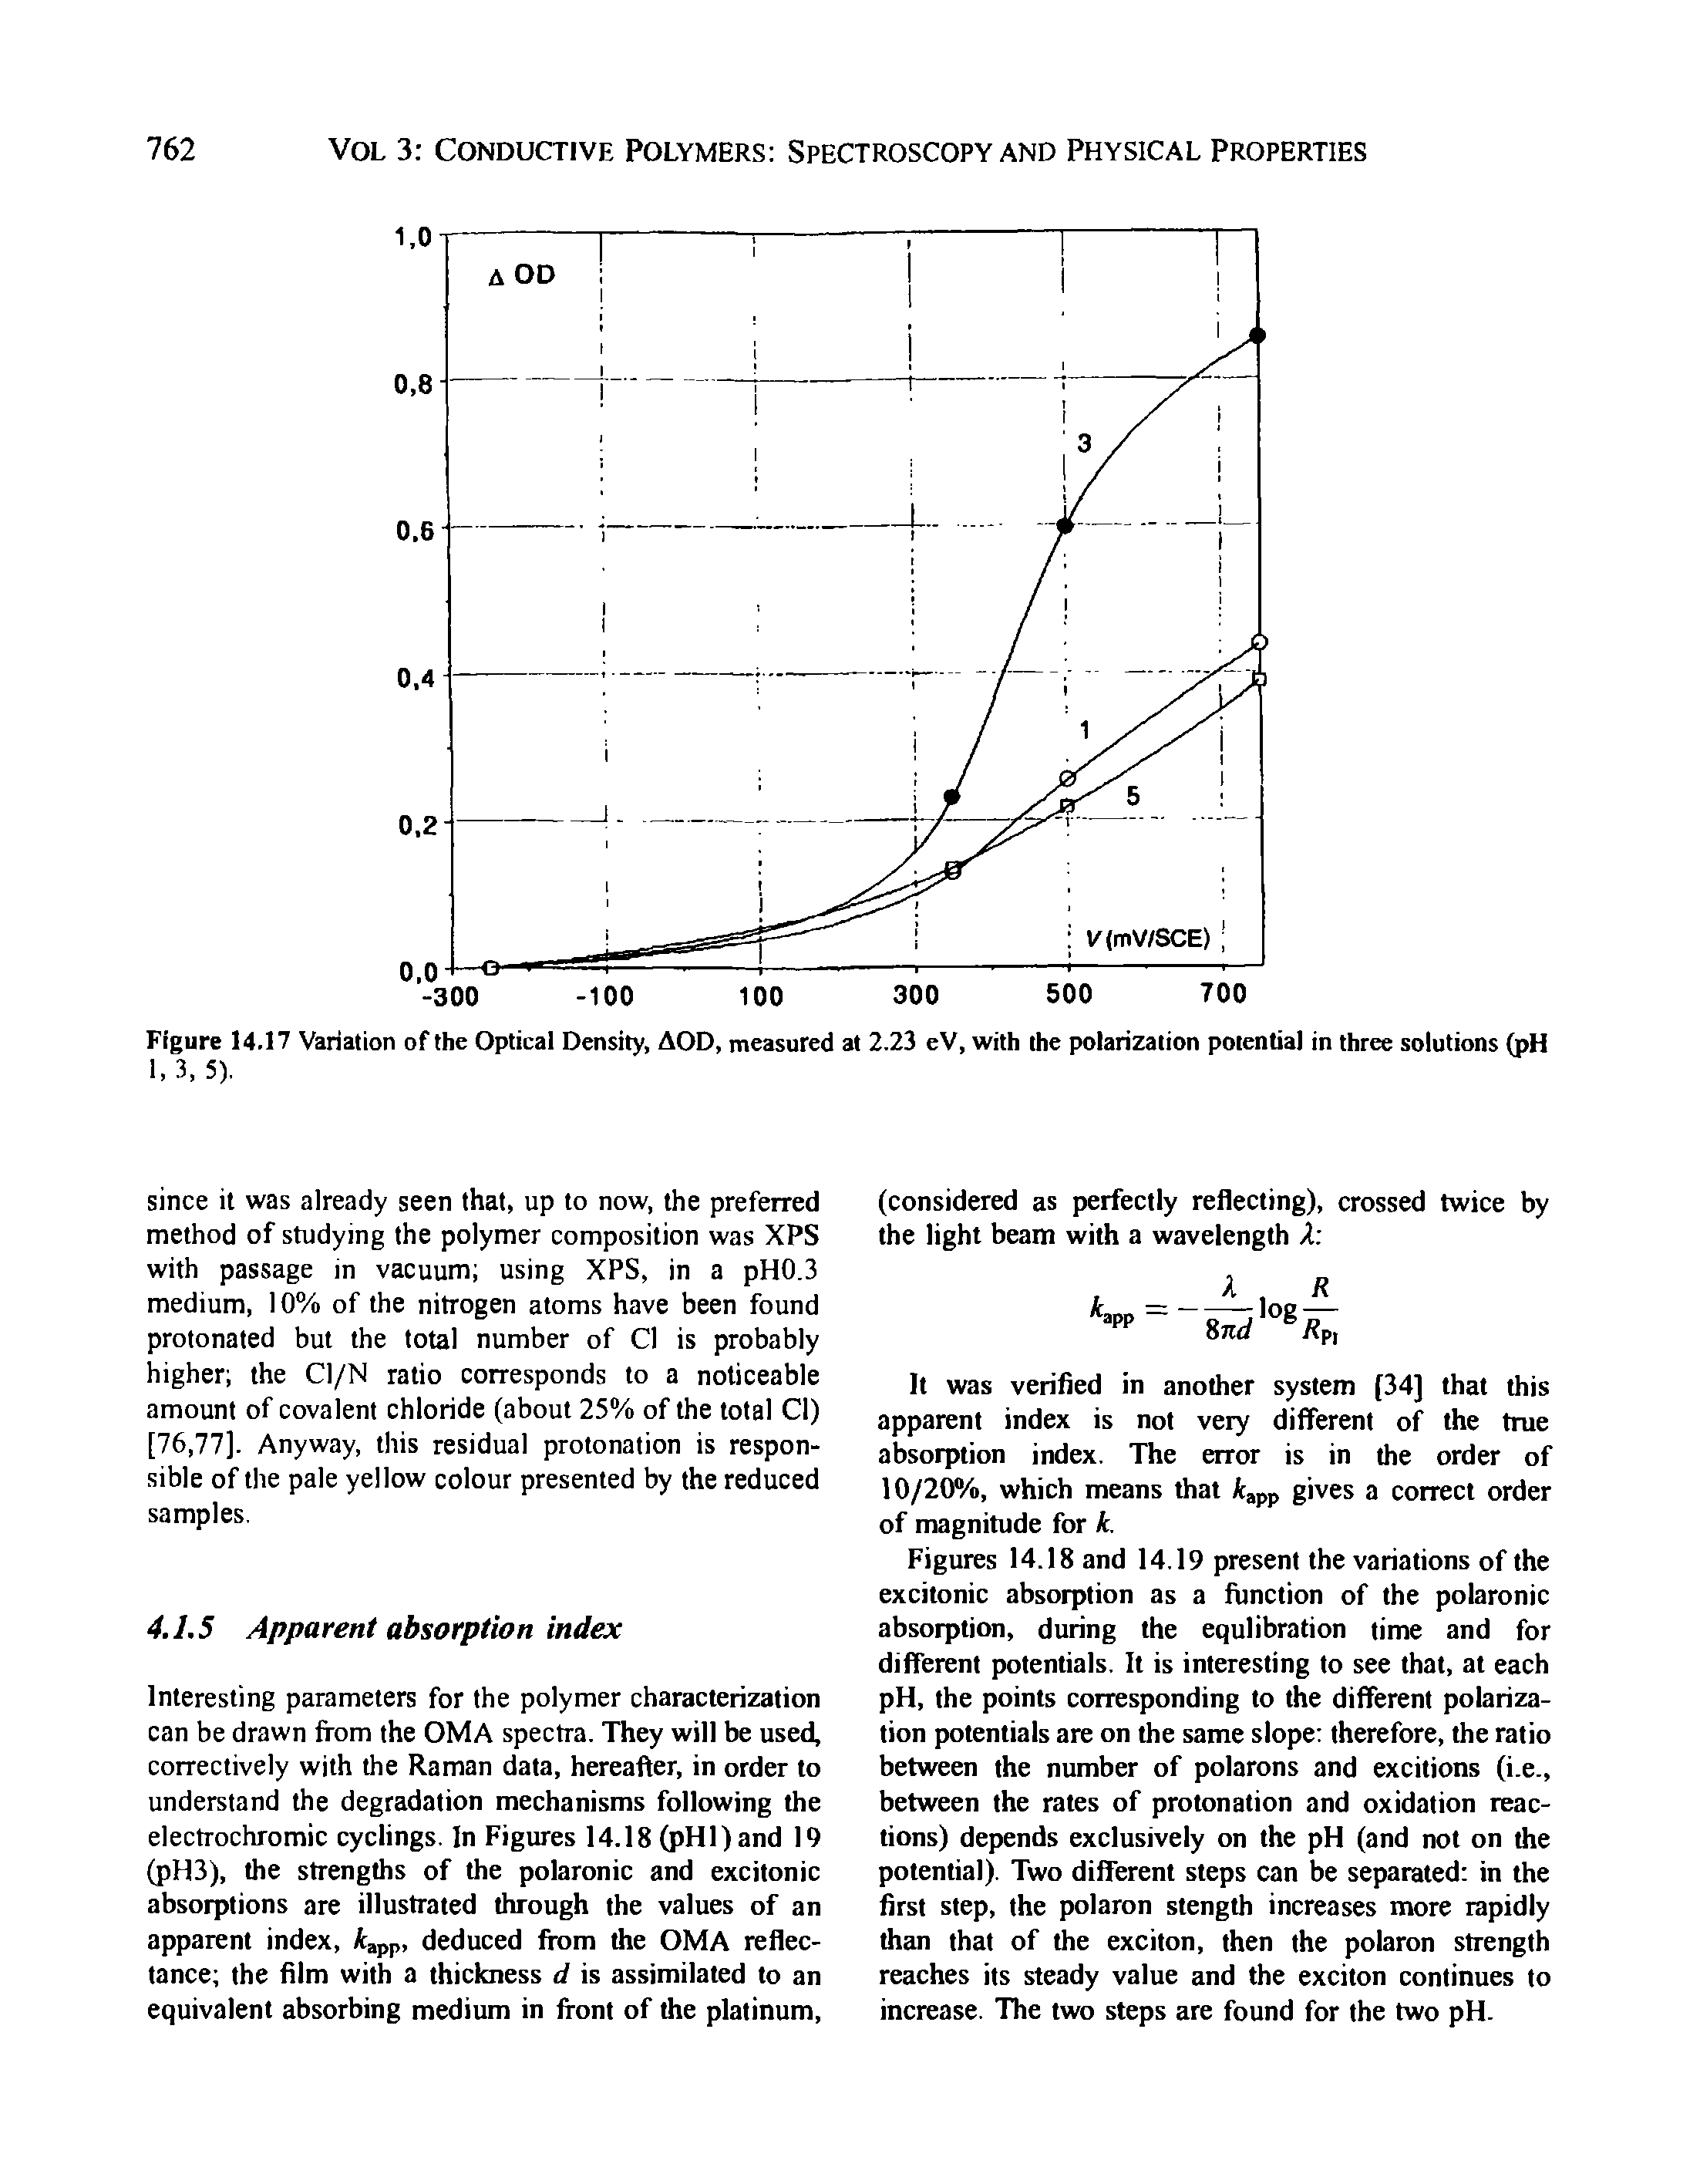 Figures 14.18 and 14.19 present the variations of the excitonic absorption as a function of the polaronic absorption, during the equlibration time and for different potentials. It is interesting to see that, at each pH, the points corresponding to the different polarization potentials are on the same slope therefore, the ratio between the number of polarons and excitions (i.e., between the rates of protonation and oxidation reactions) depends exclusively on the pH (and not on the potential). Two different steps can be separated in the first step, the polaron stength increases more rapidly than that of the exciton, then the polaron strength reaches its steady value and the exciton continues to increase. The two steps are found for the two pH.